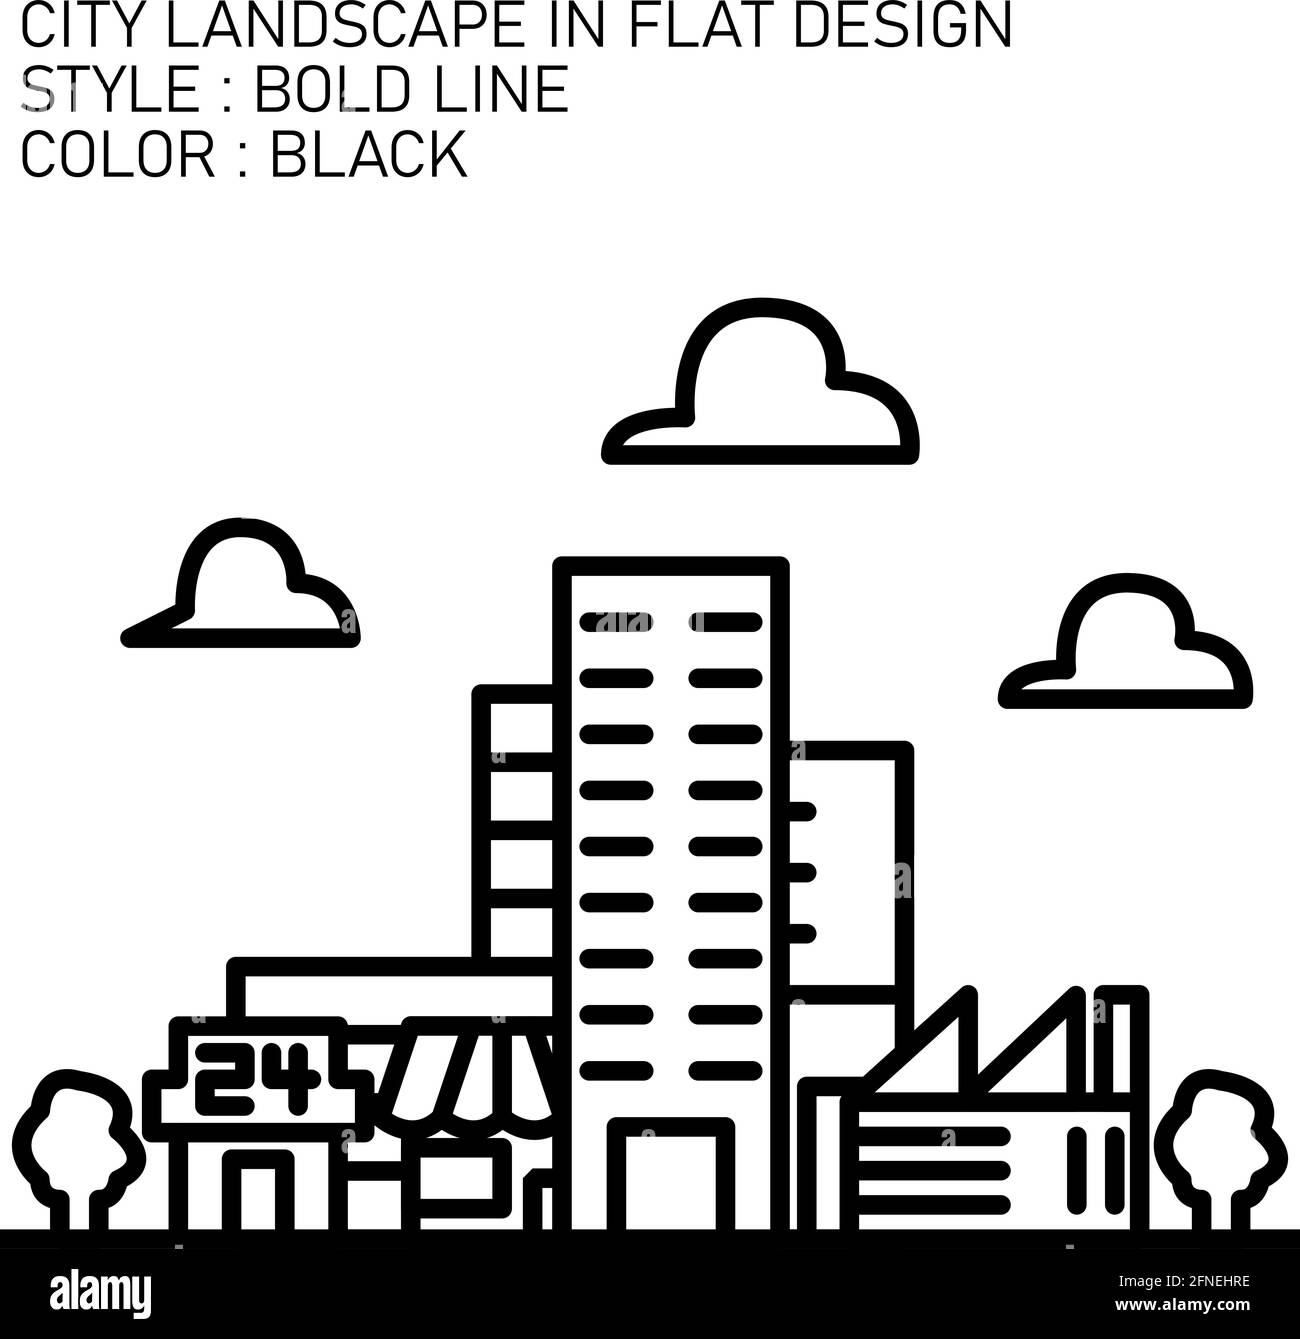 city landscape in flat design with black bold lines, white fills. Stock Vector